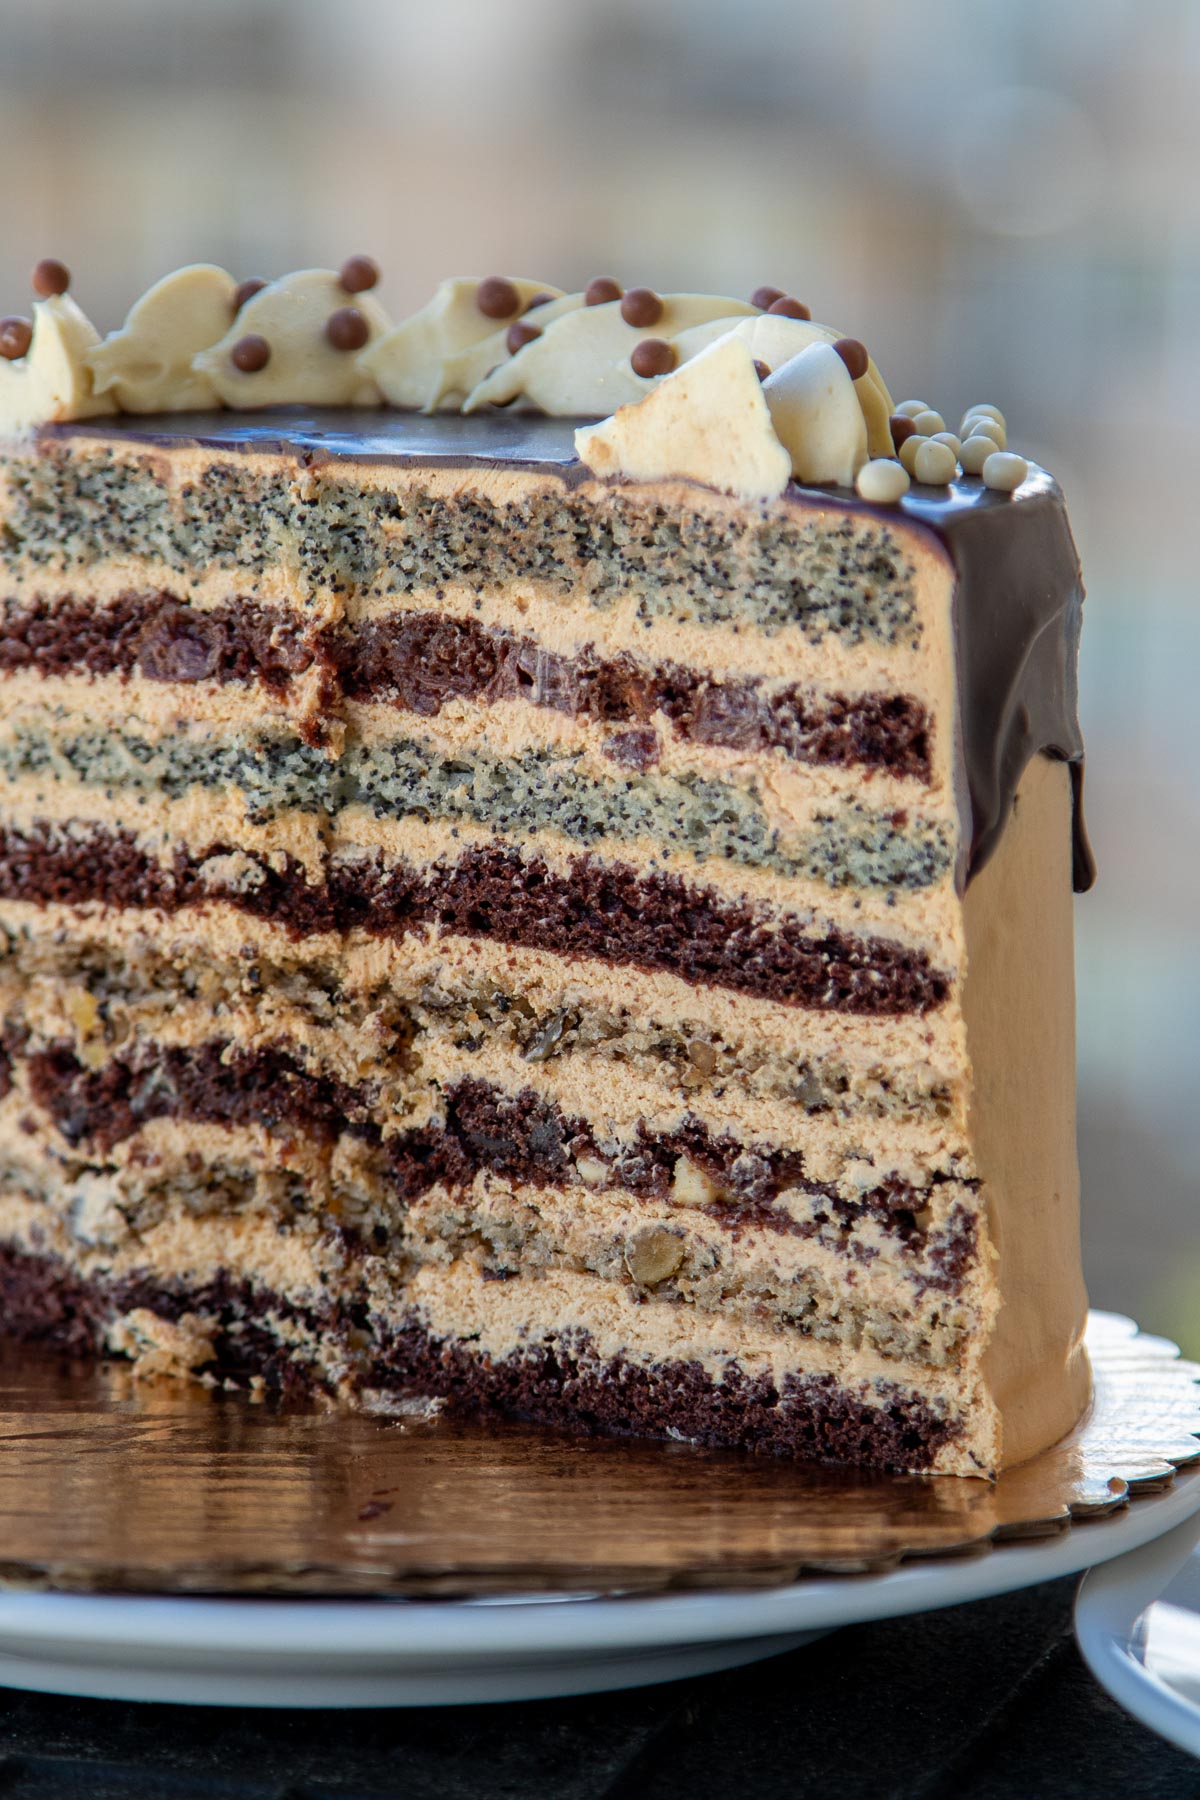 Russian Royal Cake is made with walnut, poppyseed, cherry and chocolate cake layers frosted with Dulce De Leche Buttercream then drizzled with Chocolate. Also known as Korolevskiy Cake this Russian Cake is voted the most favorite cake in my family.